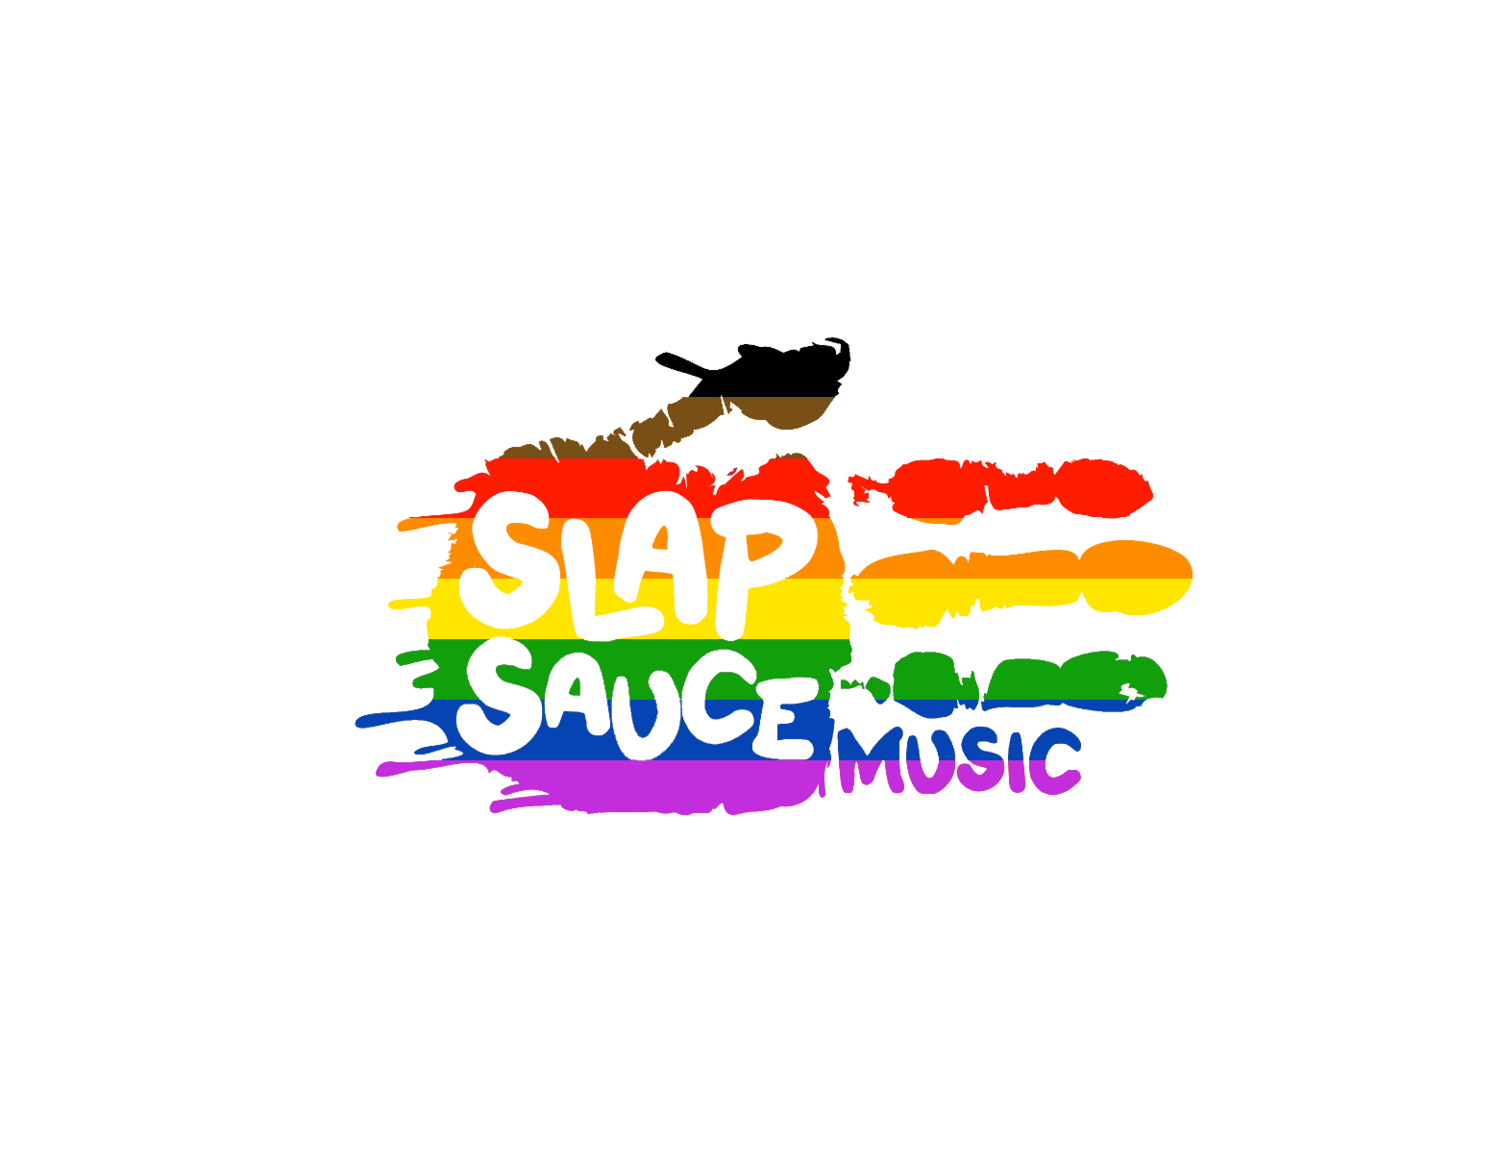 Slapsauce Logo With Pride Colors